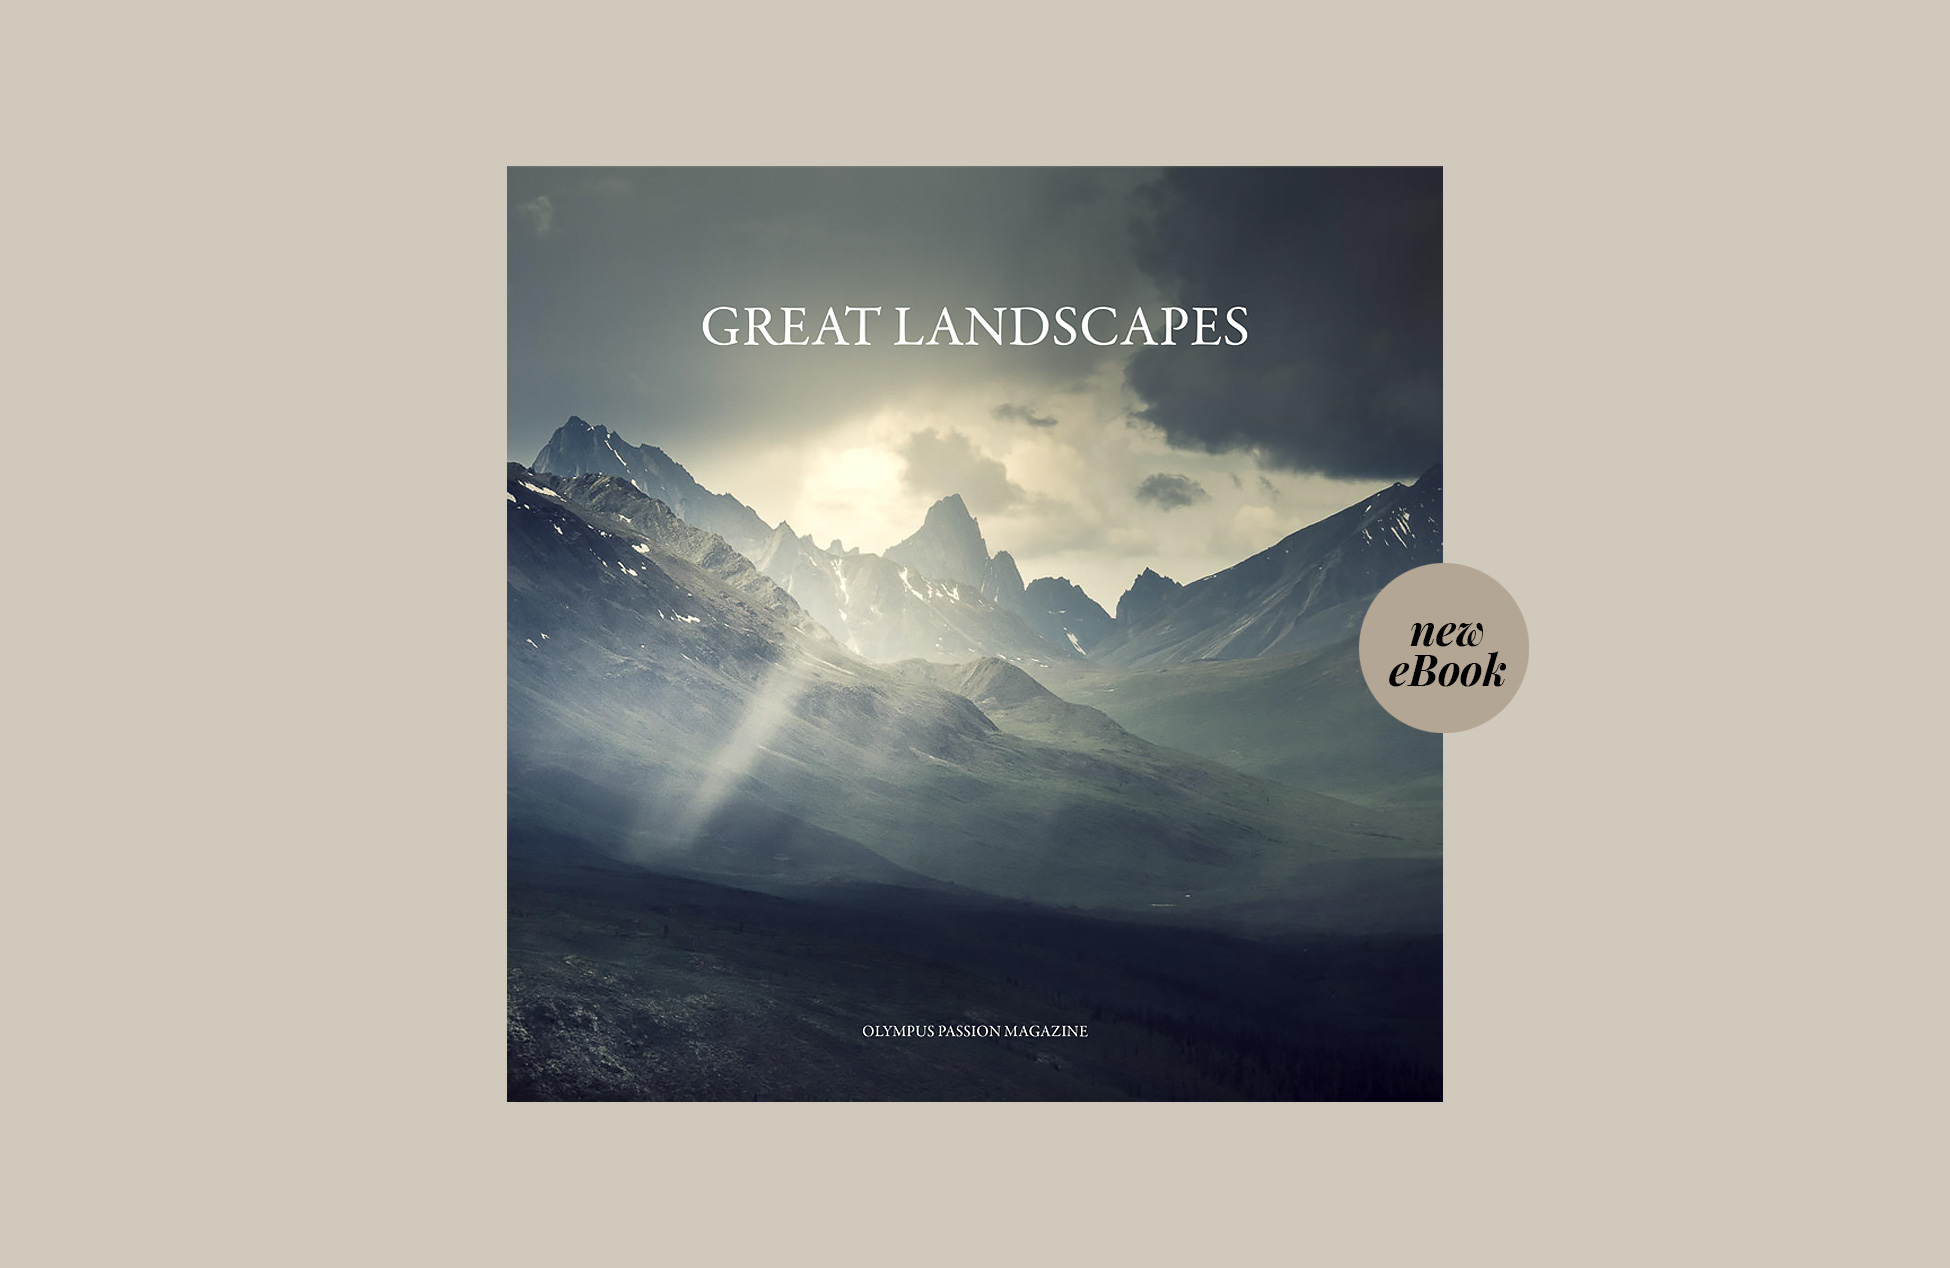 New eBook Great Landscapes